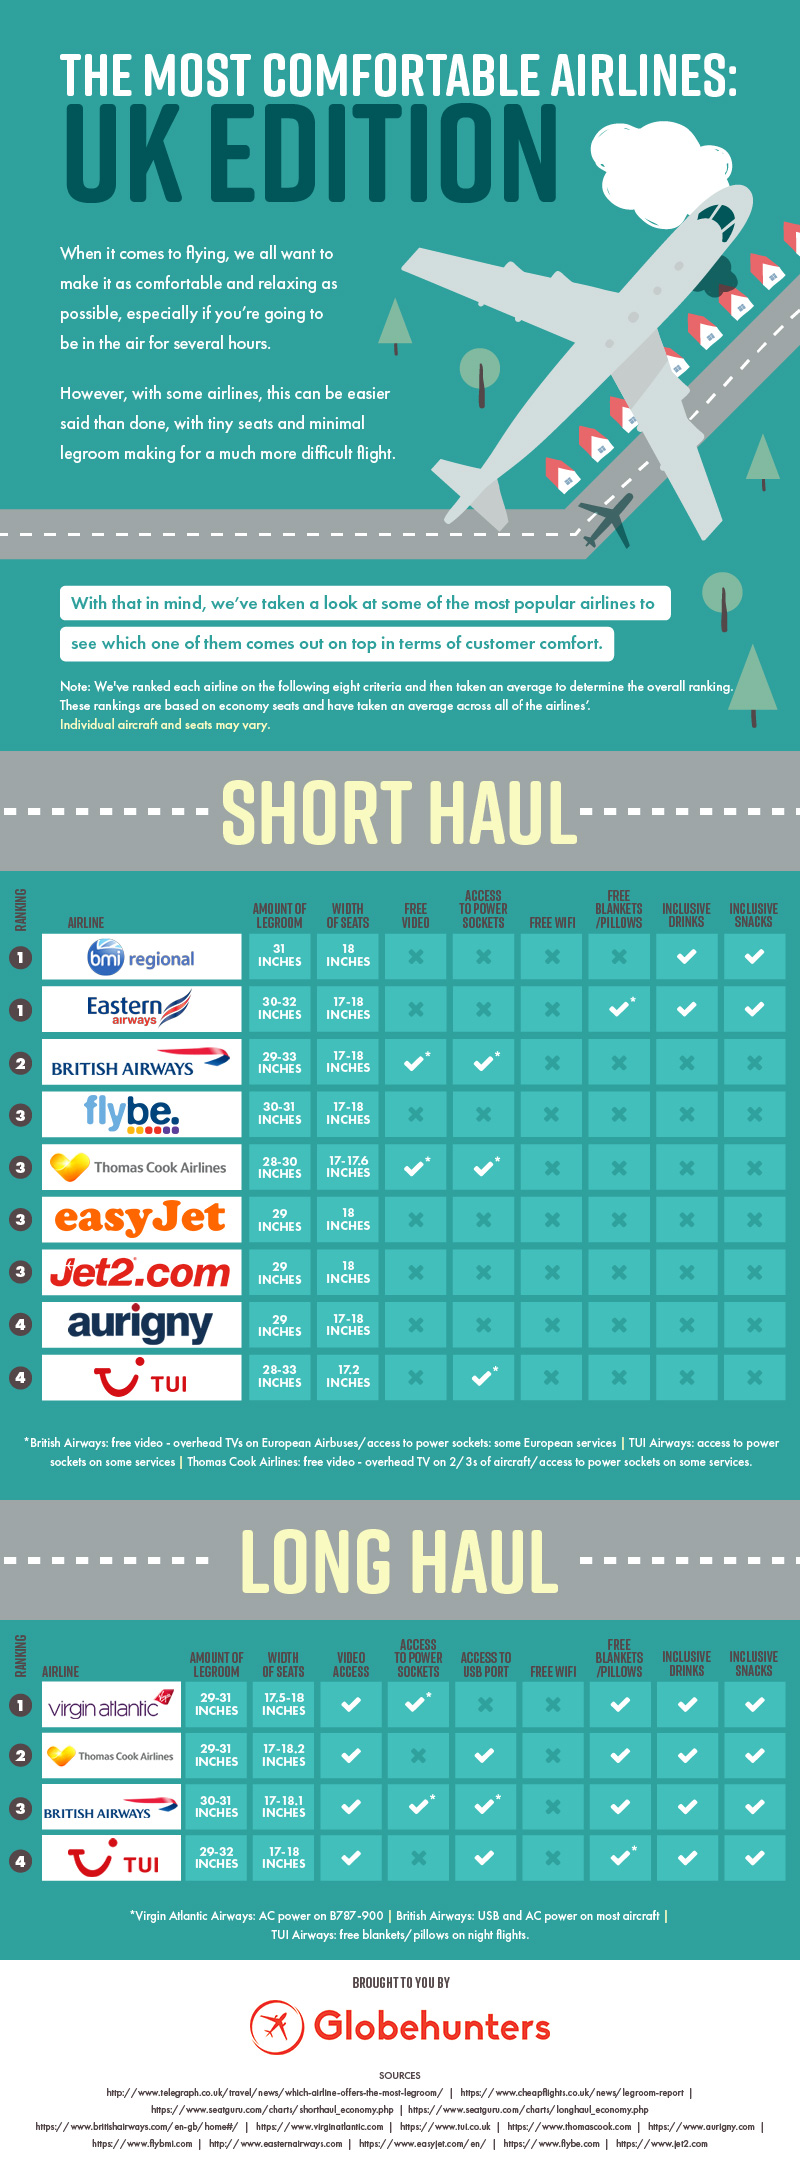 Revealed - The Most Comfortable Airlines (UK Edition)